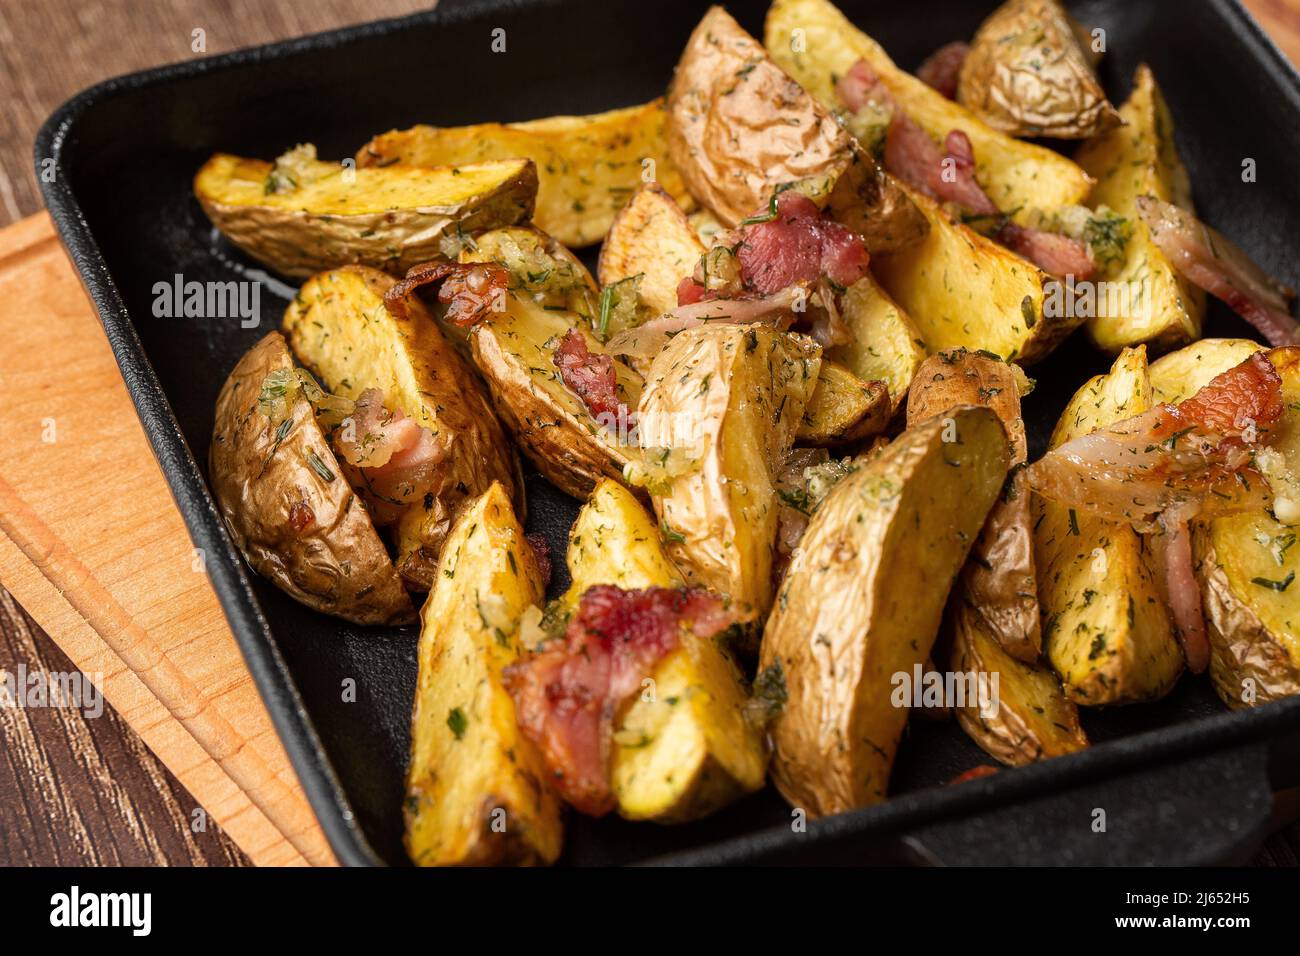 Delicious Fried Potato Bratkartoffeln With Bacon and Onion close up in the black plate on the table Stock Photo